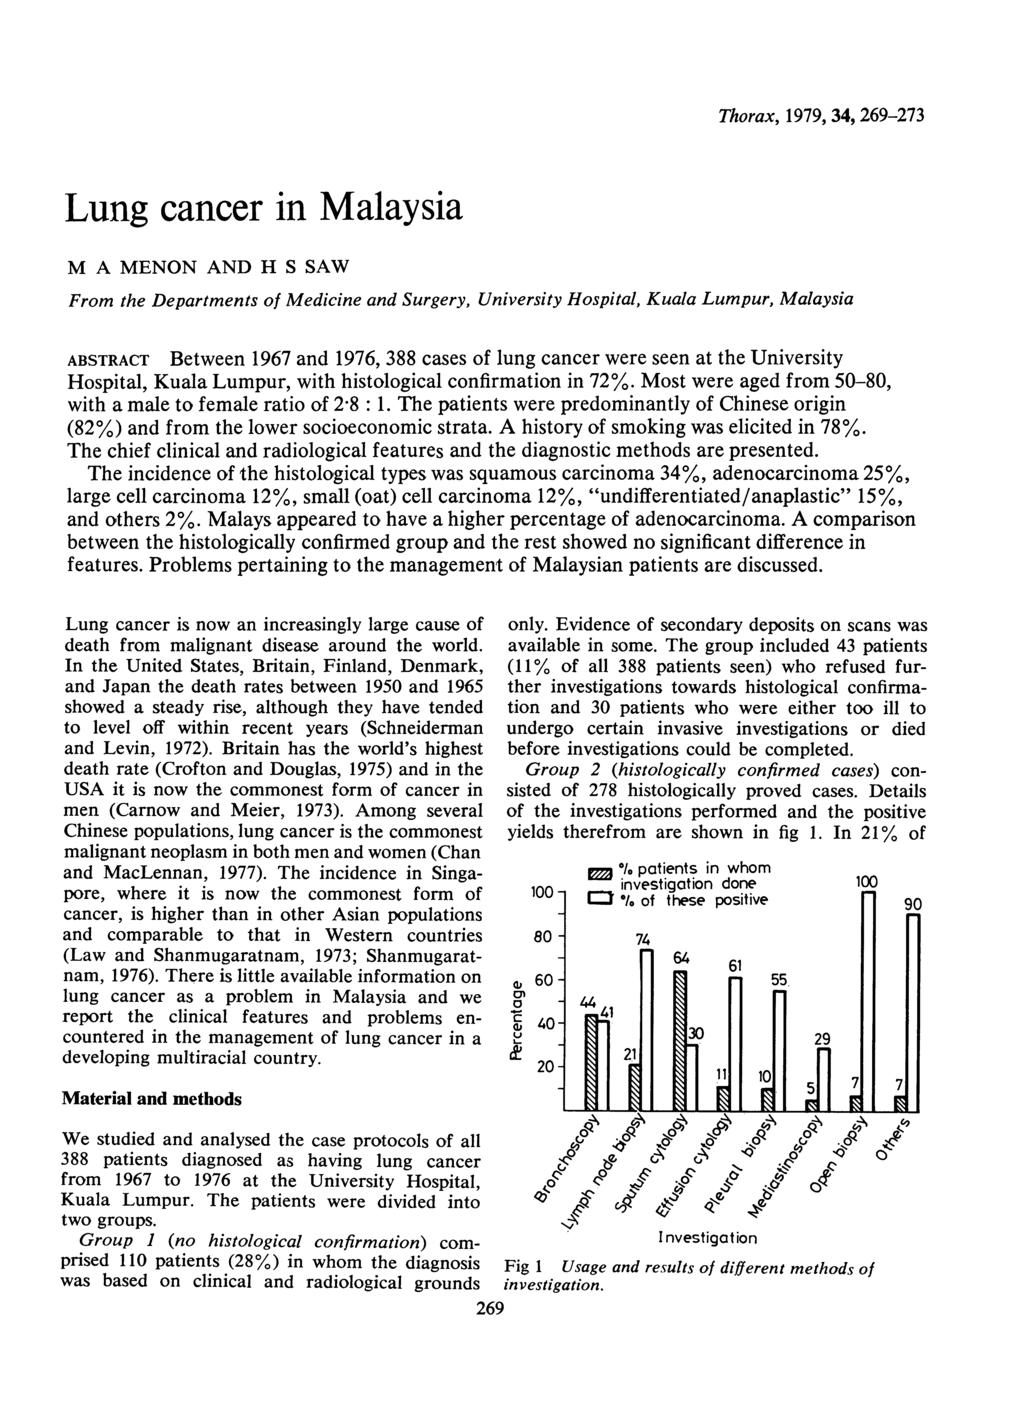 Lung cancer in Malaysia M A MENON AND H S SAW Thorax, 1979, 34, 269-273 From the Departments of Medicine and Surgery, University Hospital, Kuala Lumpur, Malaysia ABSTRACT Between 1967 and 1976, 388